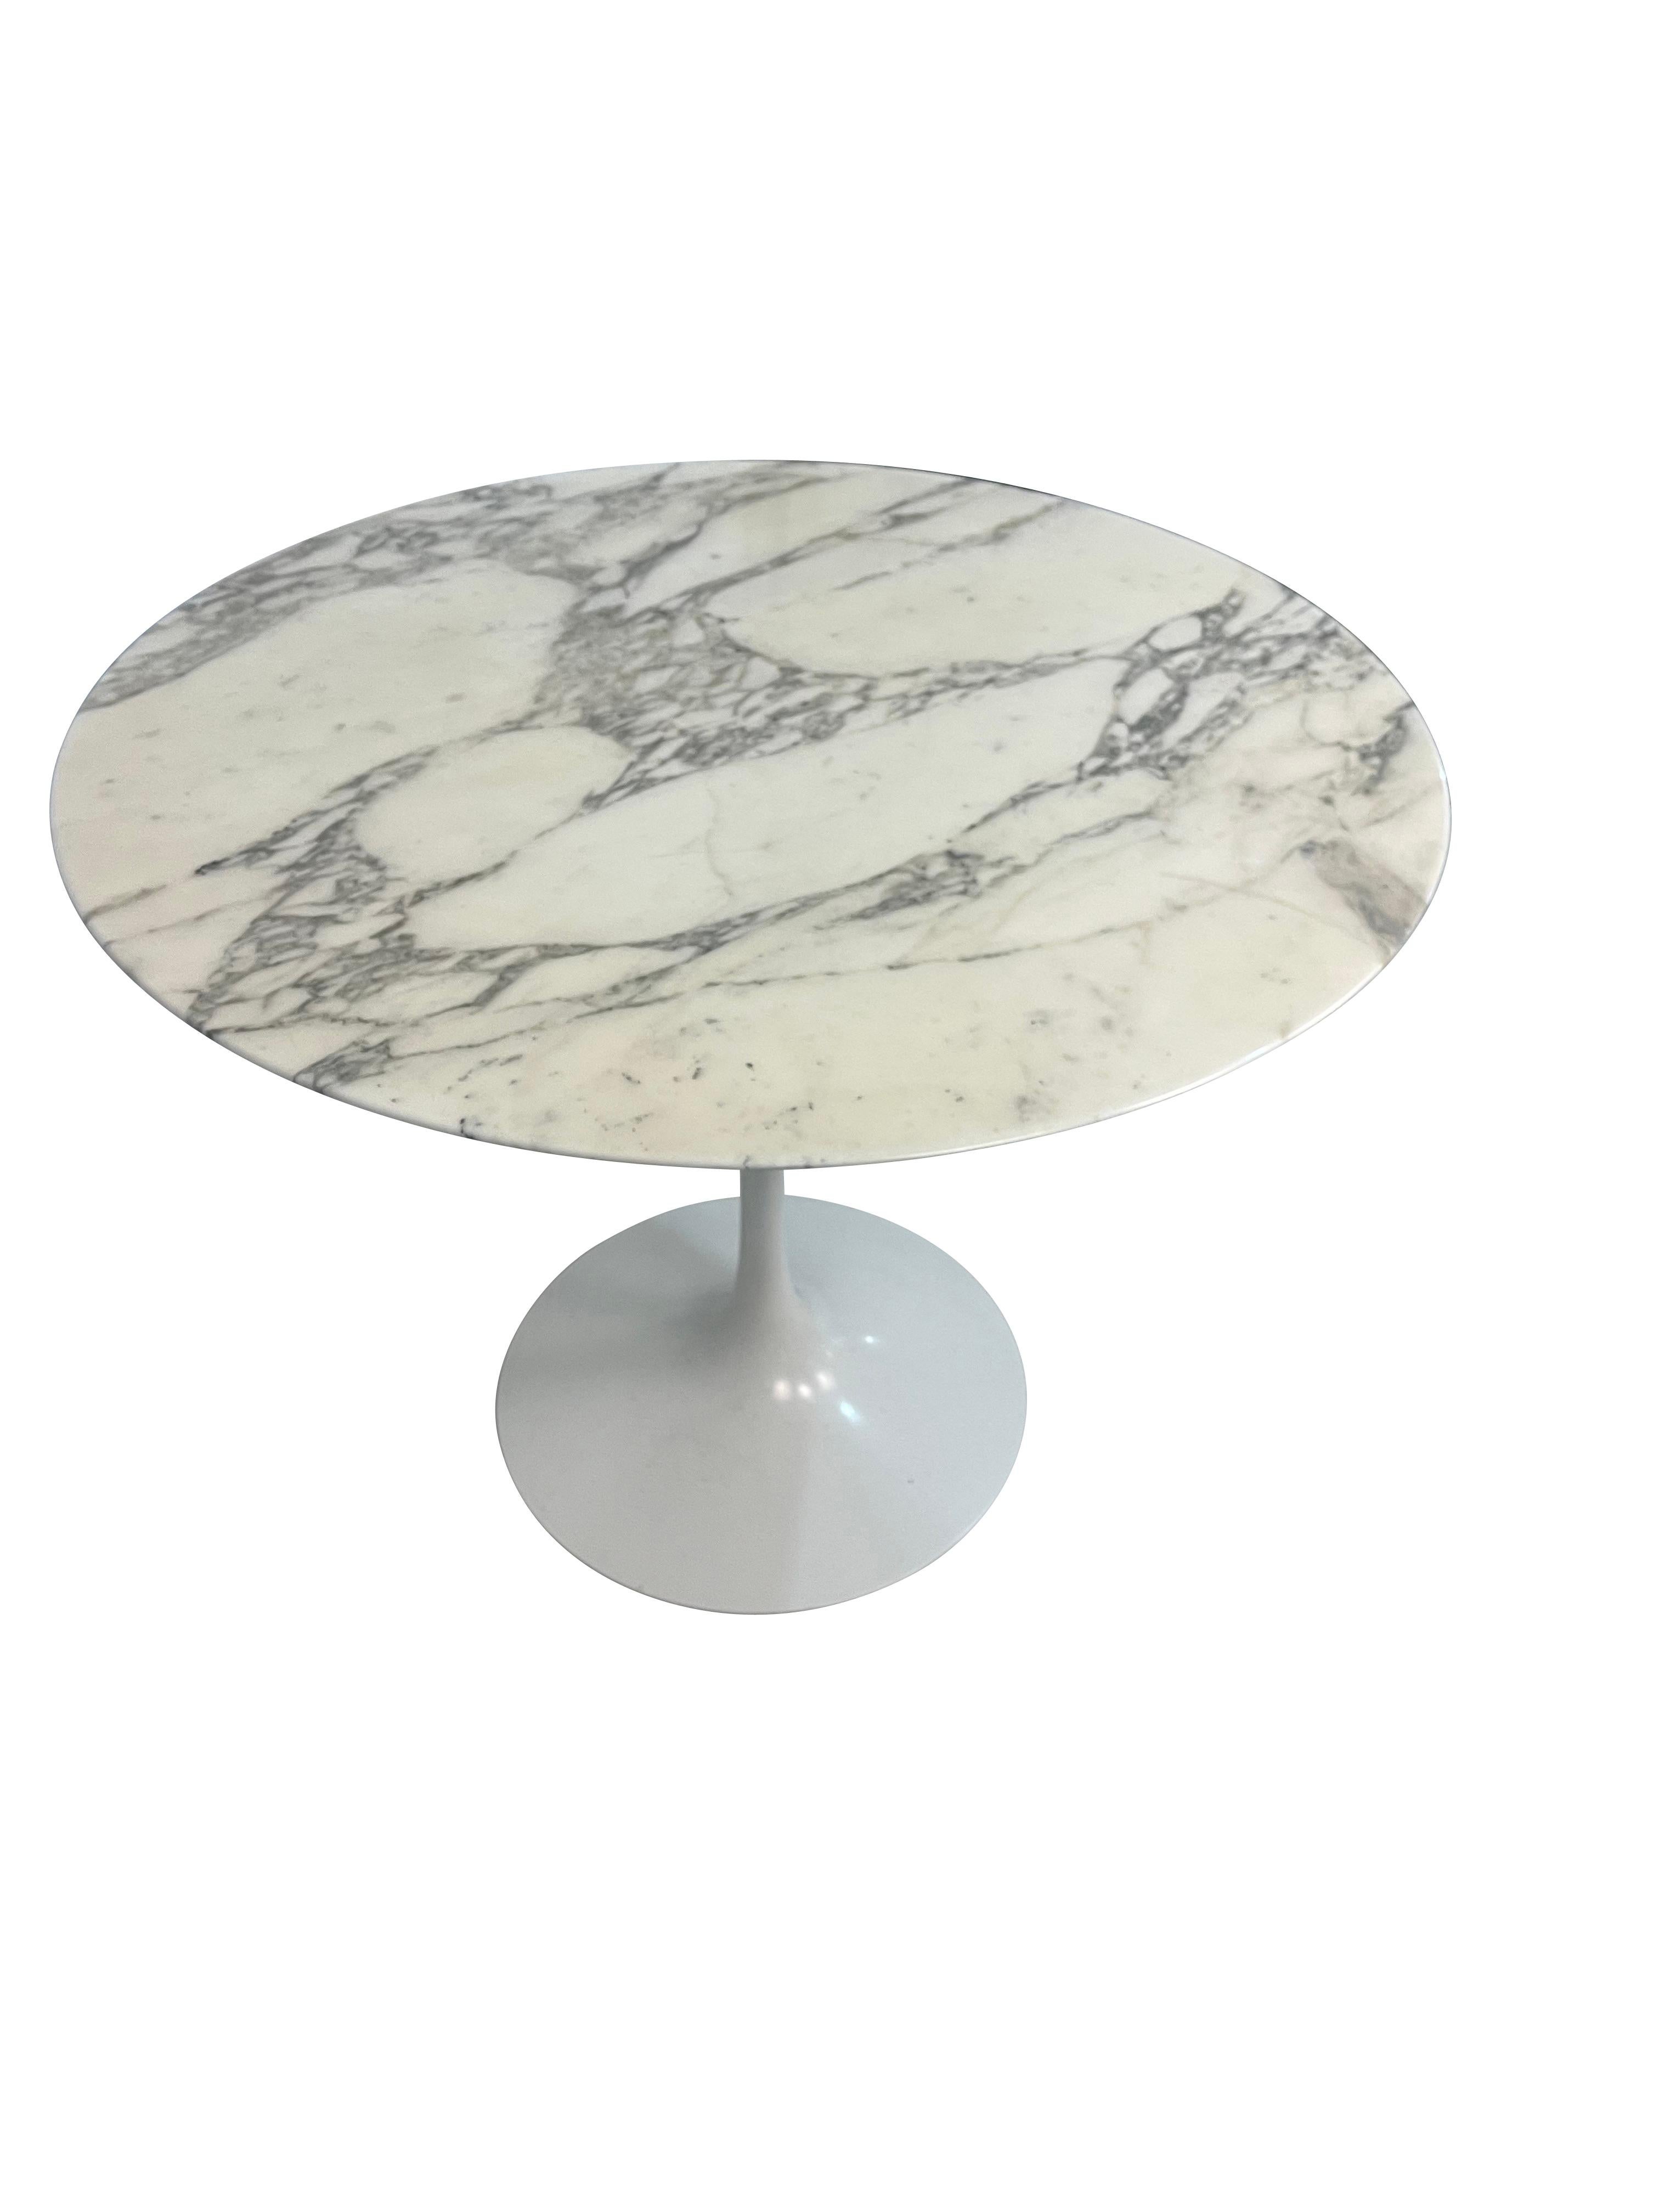 Hand-Crafted Eero Sarrinen Marble Top Pedestal Tulip Table White and Grey Carrera Marble